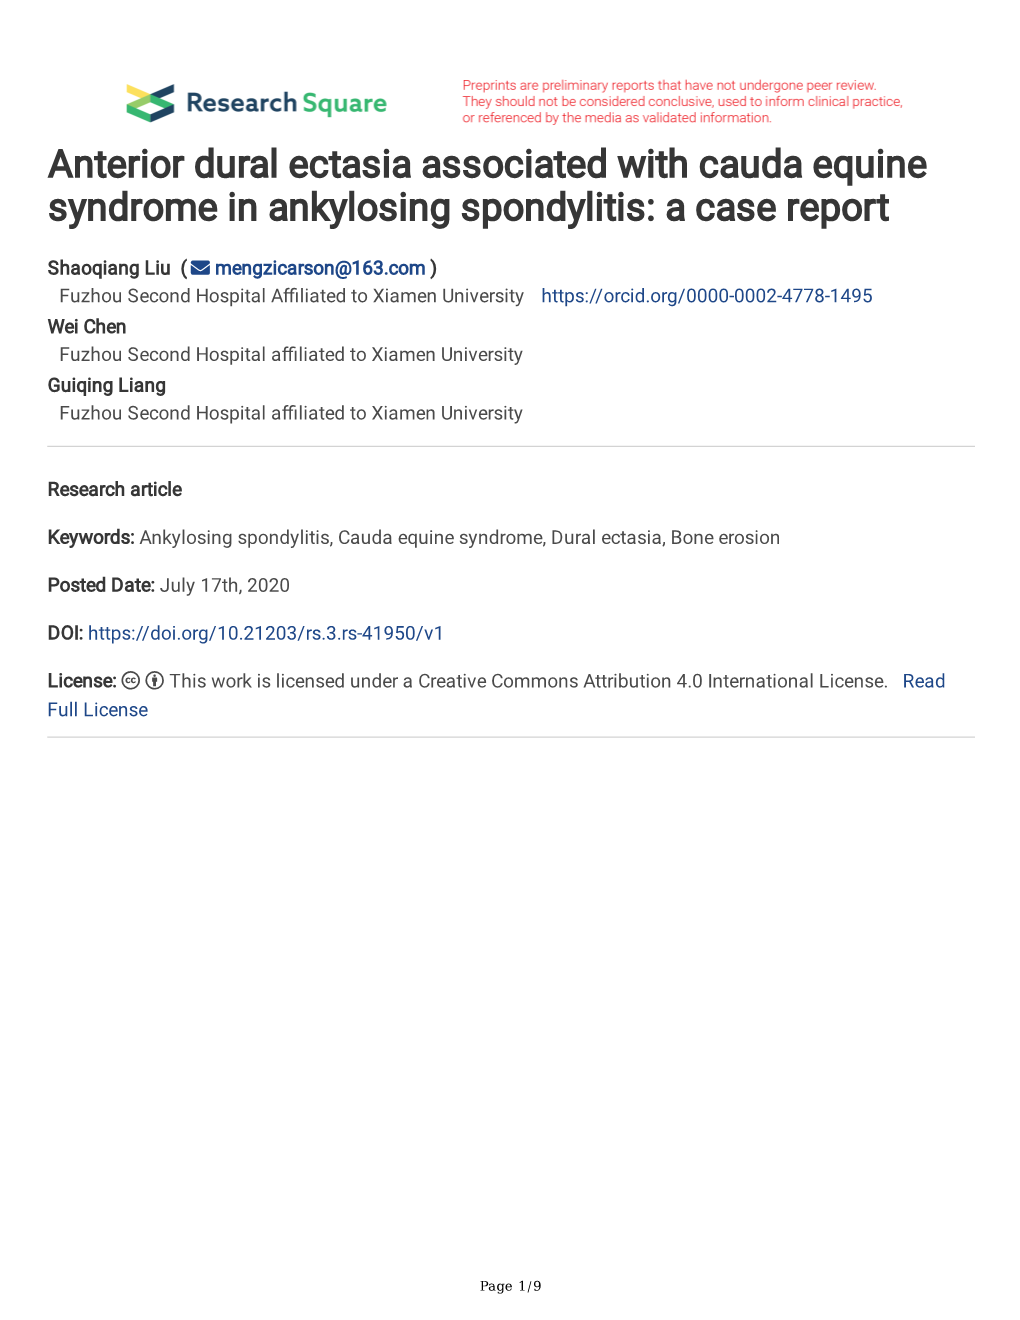 Anterior Dural Ectasia Associated with Cauda Equine Syndrome in Ankylosing Spondylitis: a Case Report